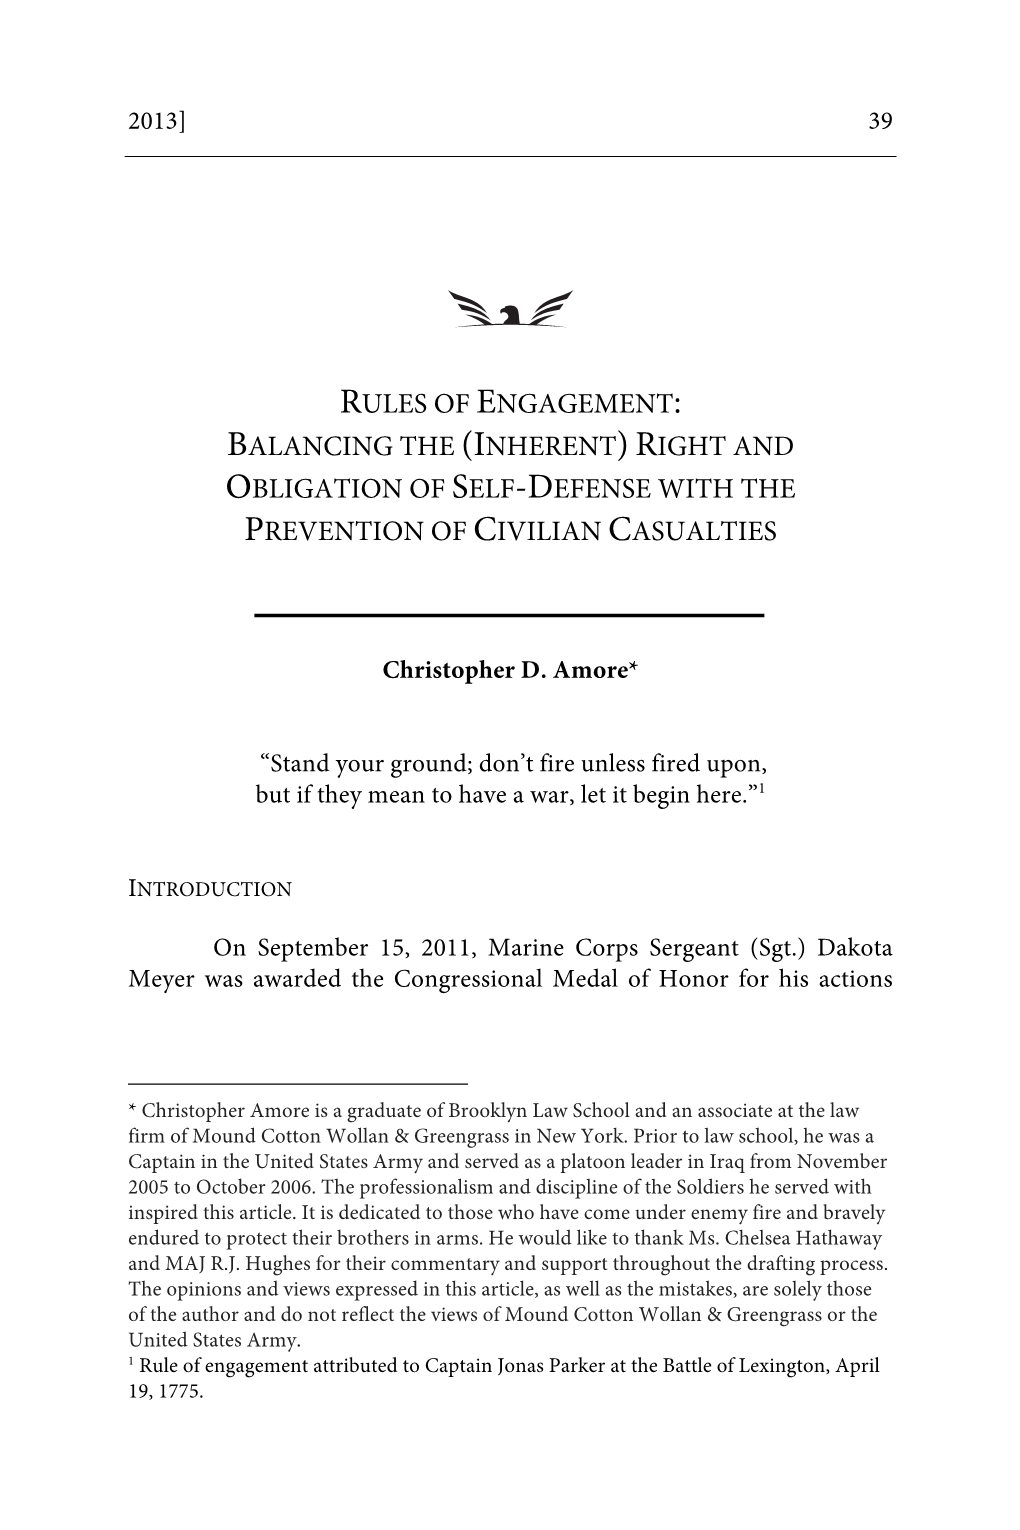 Rules of Engagement: Balancing the (Inherent) Right and Obligation of Self-Defense with the Prevention of Civilian Casualties